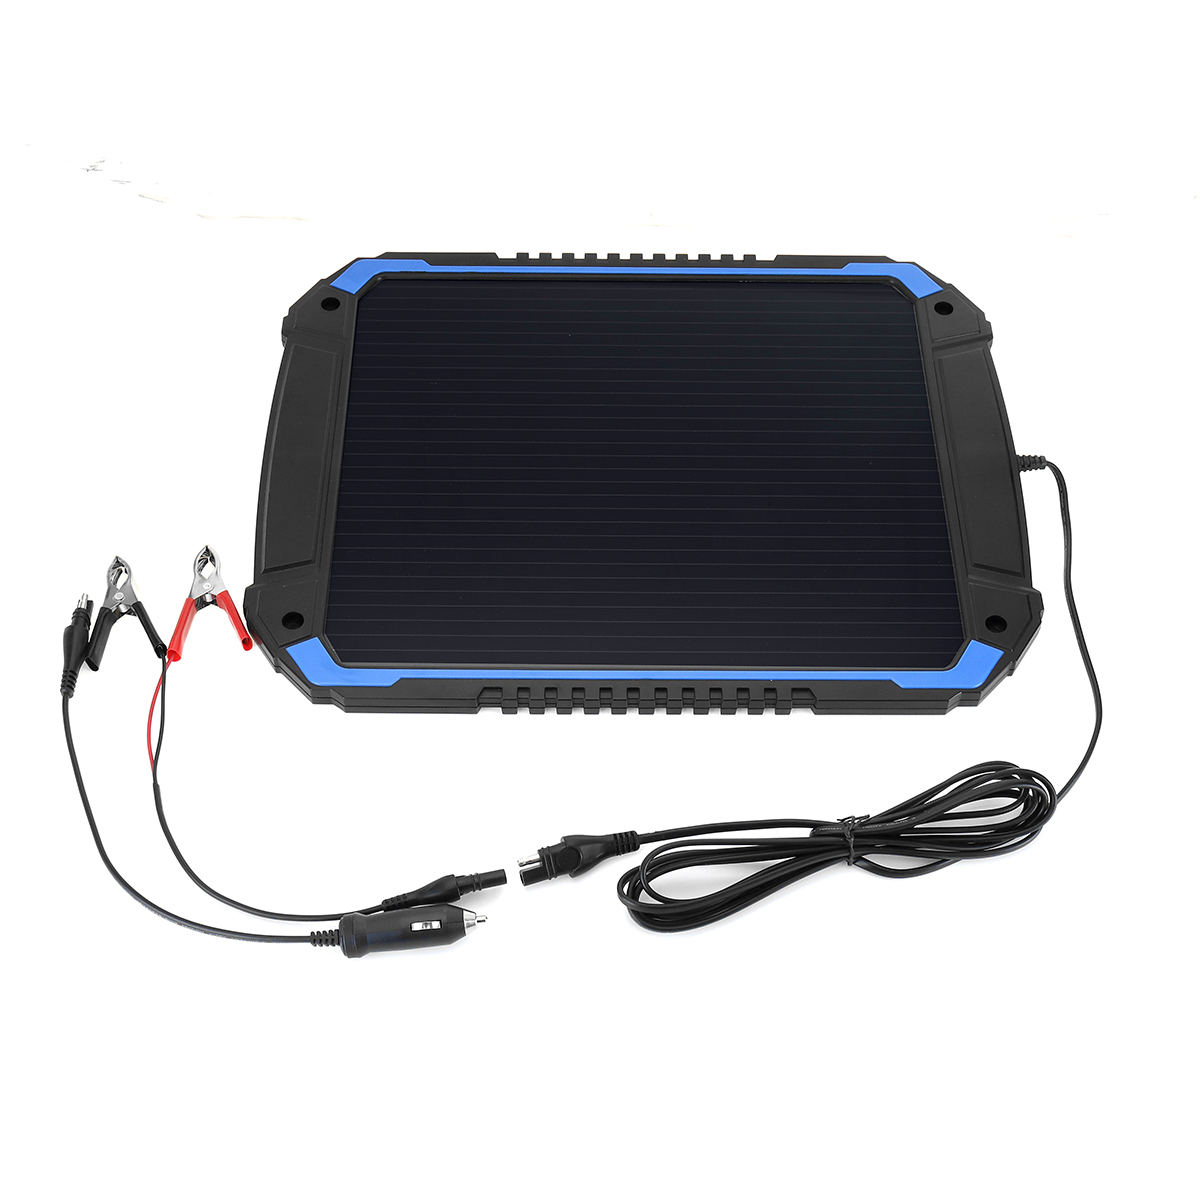 48W-18V-Portable-Solar-Panel-Power-Battery-Charger-Backup-for-Automotive-Motorcycle-Boat-Marine-RV-e-1451189-2